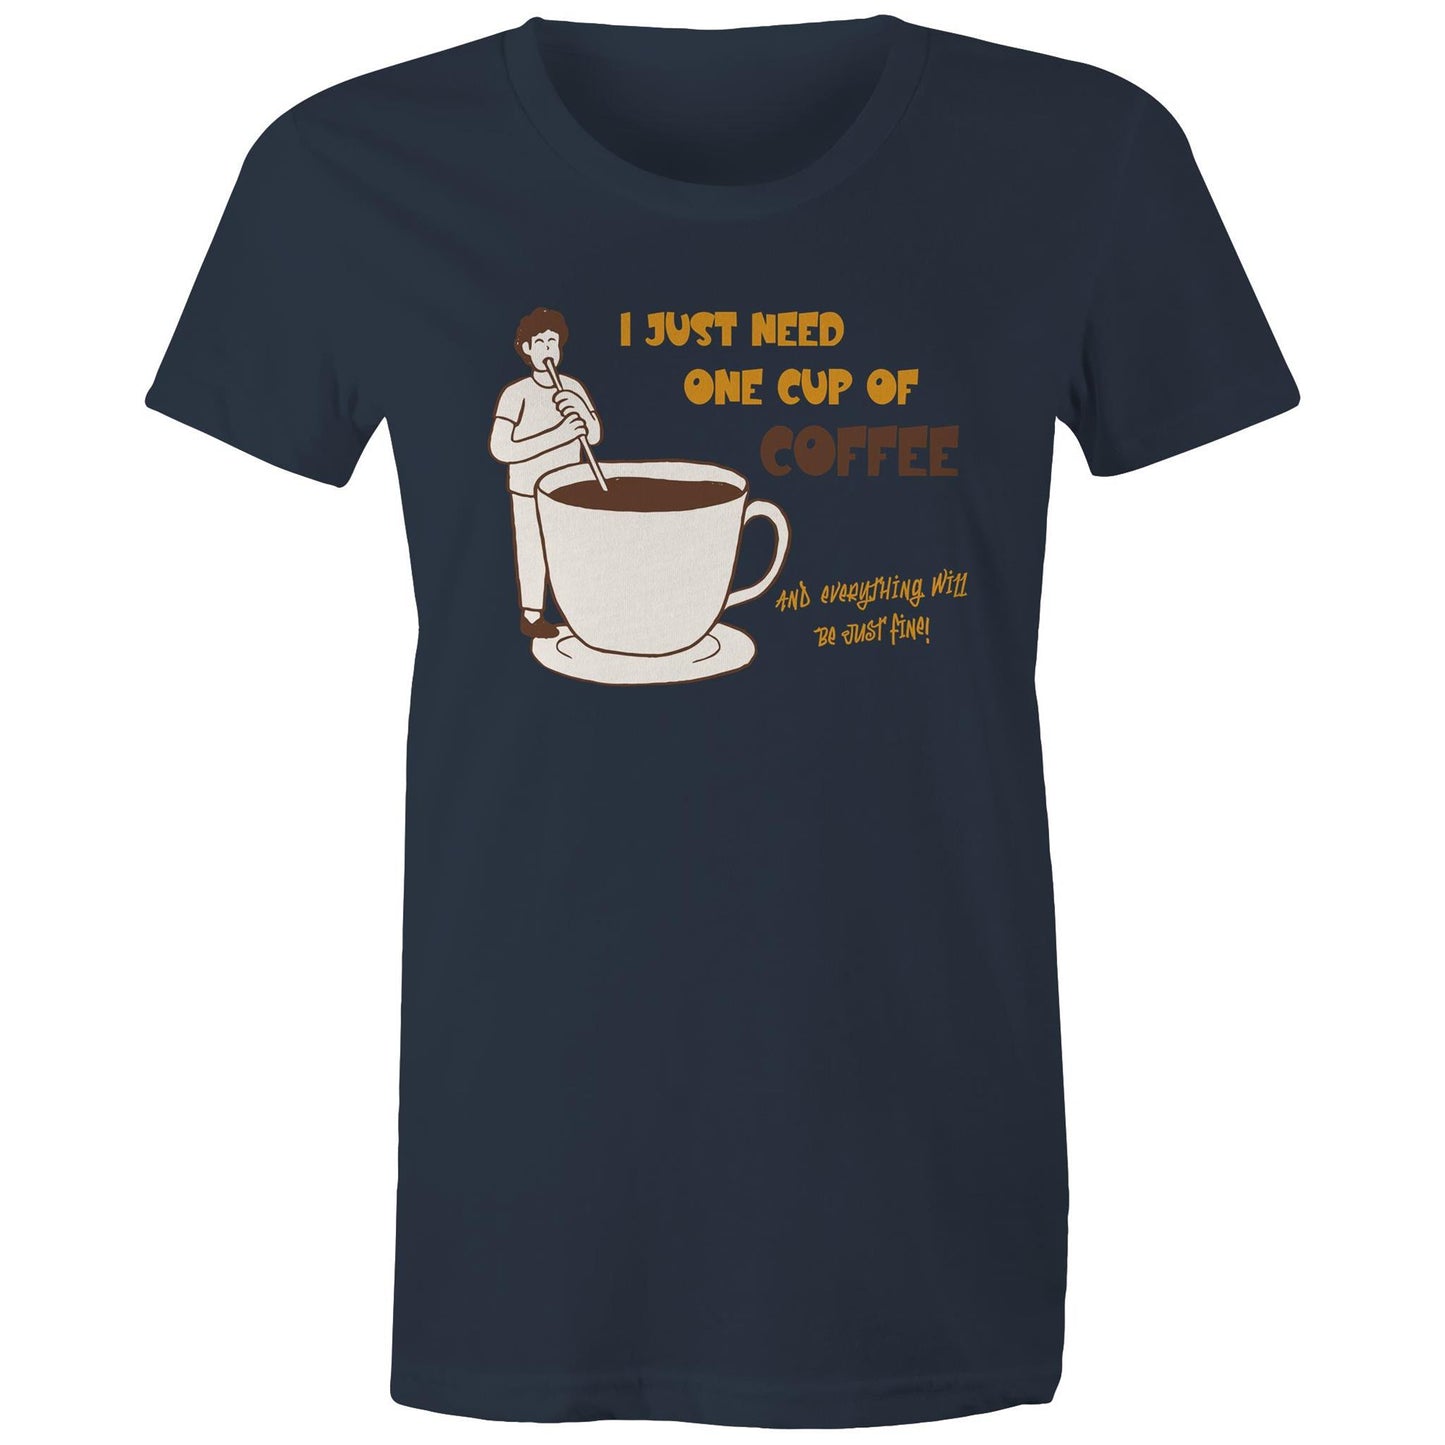 I Just Need One Cup Of Coffee And Everything Will Be Just Fine - Womens T-shirt Navy Womens T-shirt Coffee